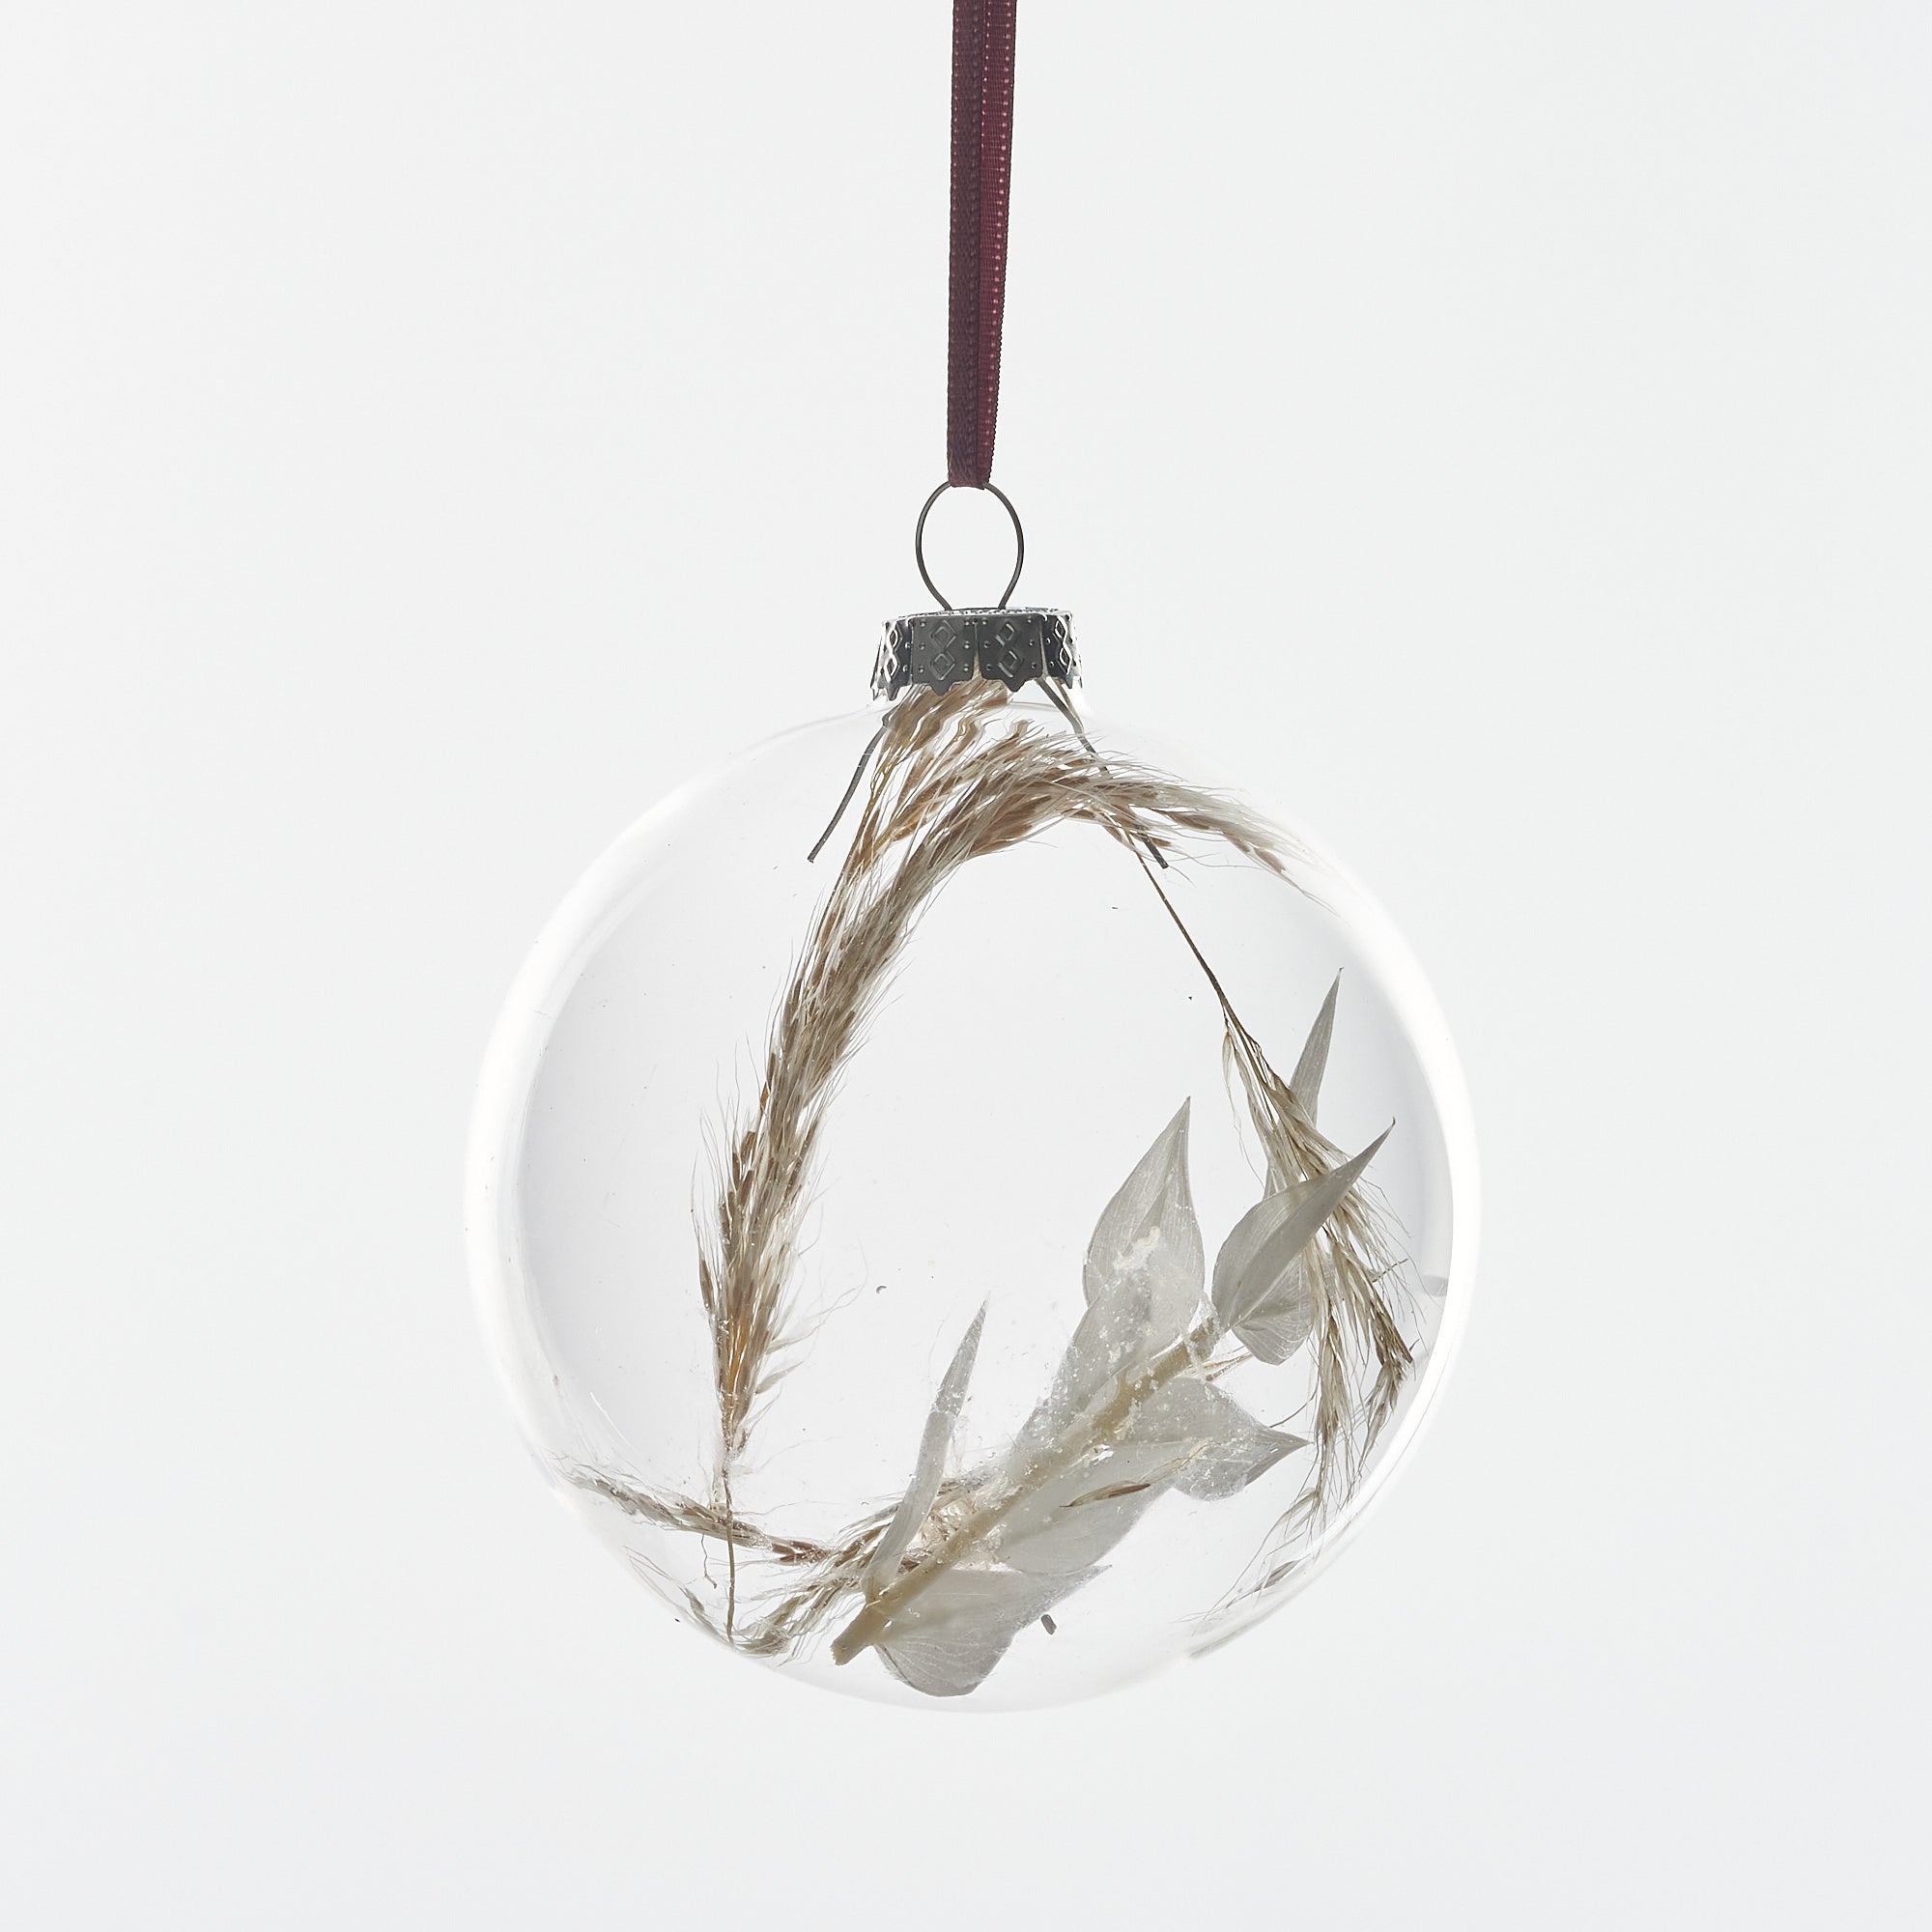 Set of 5 Dried flower Baubles: White